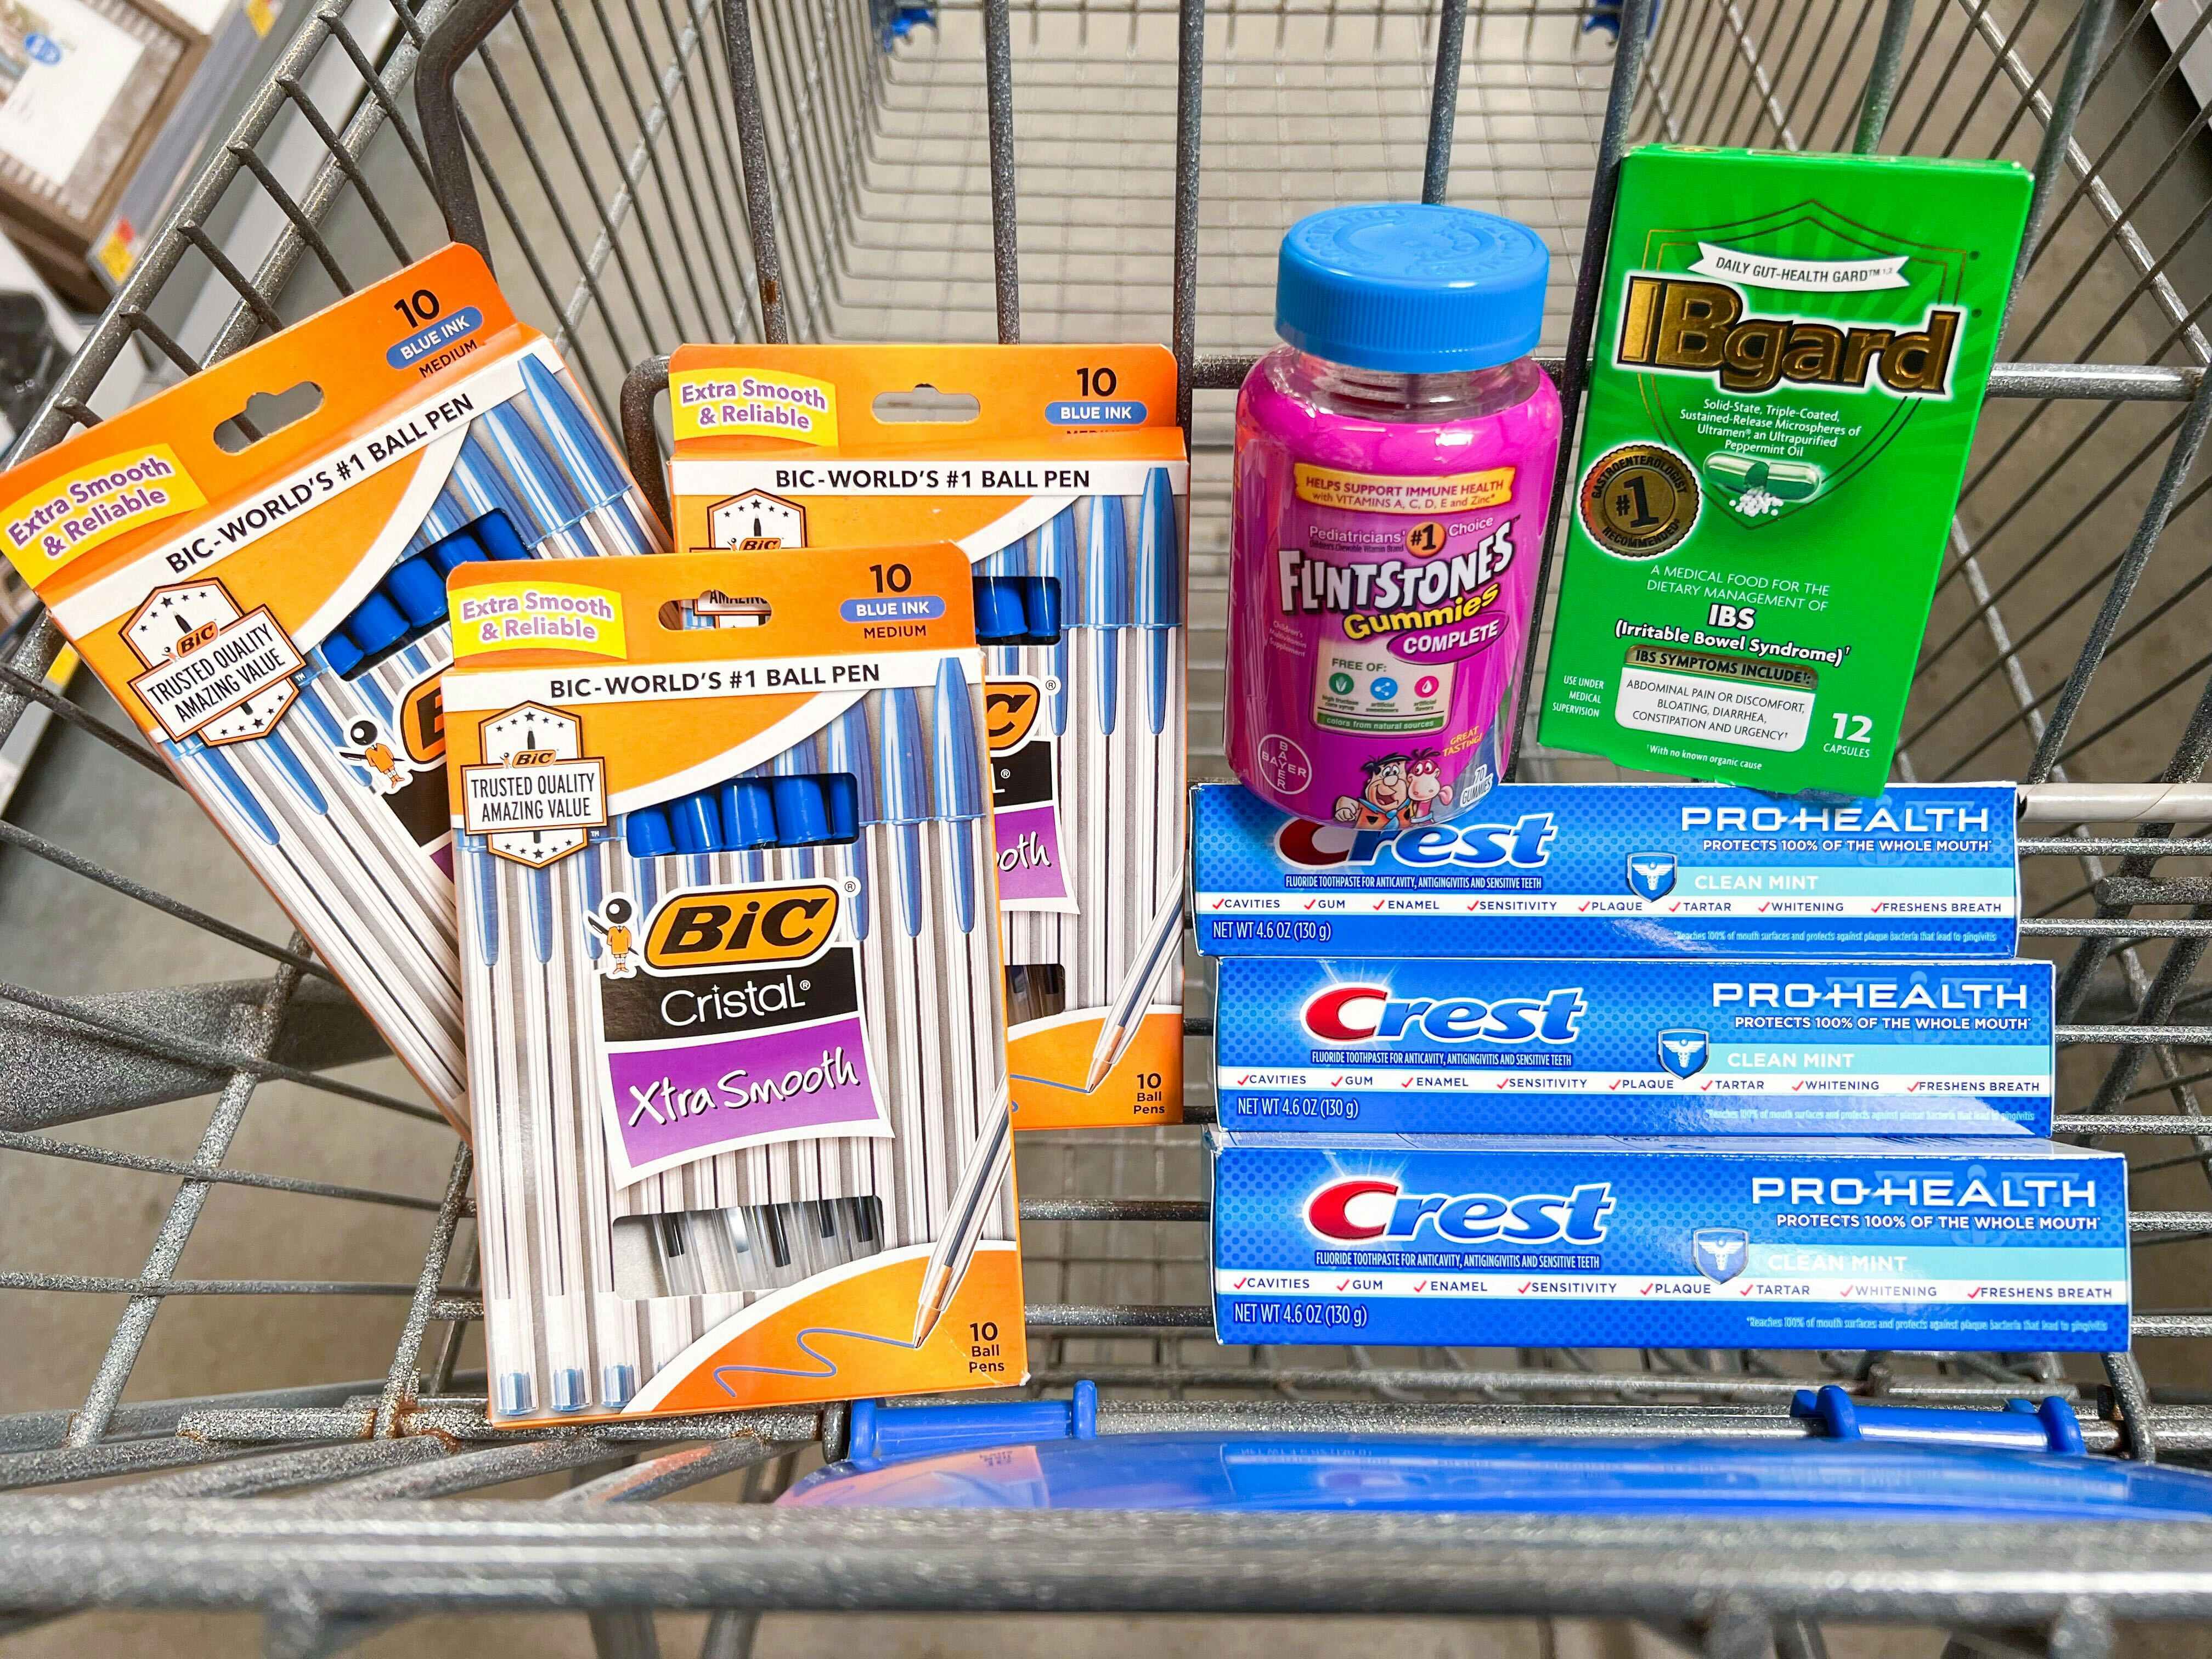 Crest, Flinstones Vitamins, IBguard, and BIC products in Walmart shopping cart